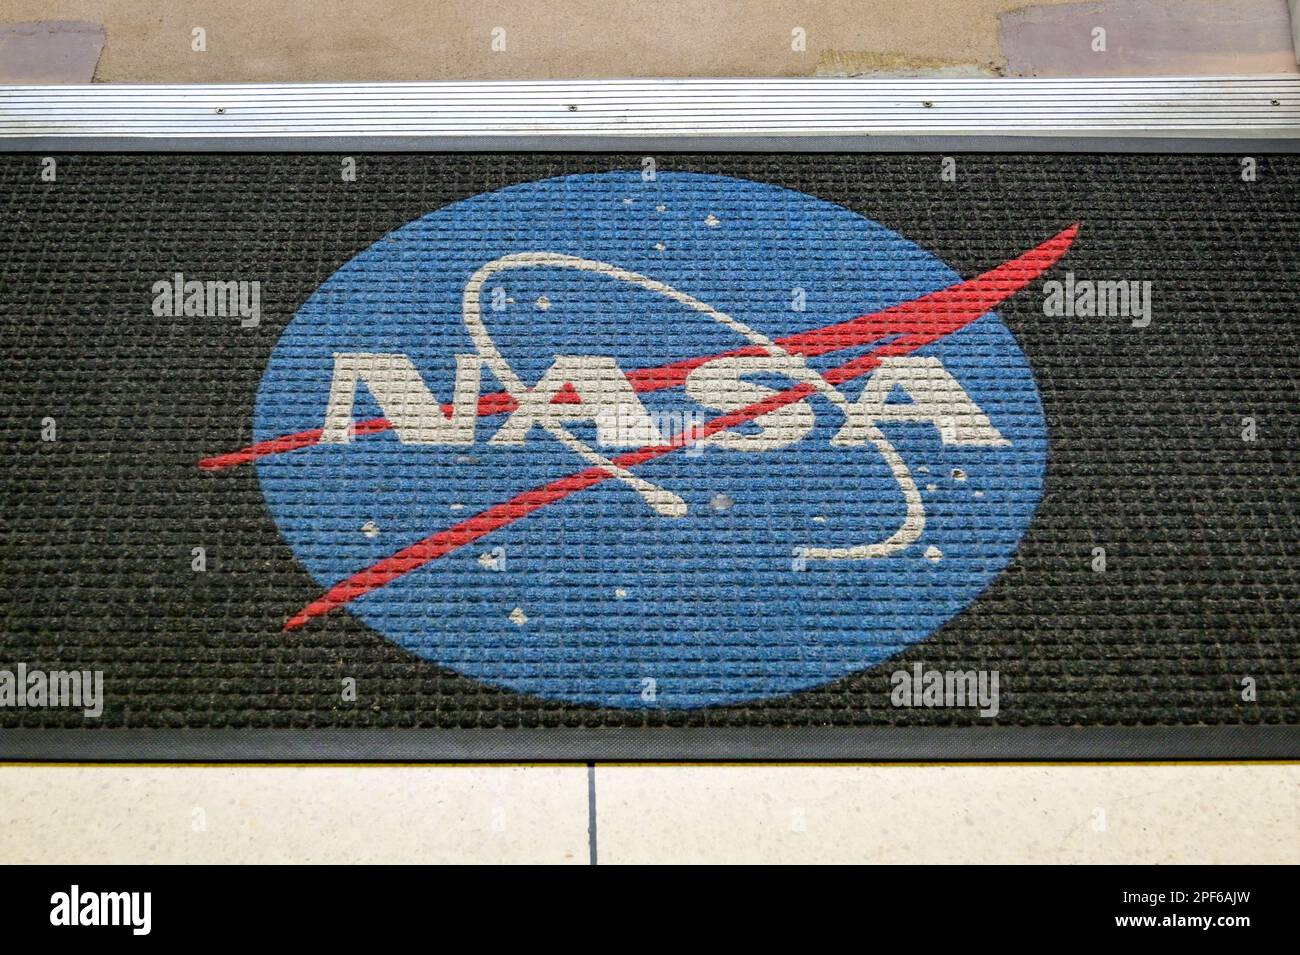 Houston, Texas, USA - February 2023: Door mat with NASA logo at one of the entrances to Mission Control at the Houston Space Center Stock Photo